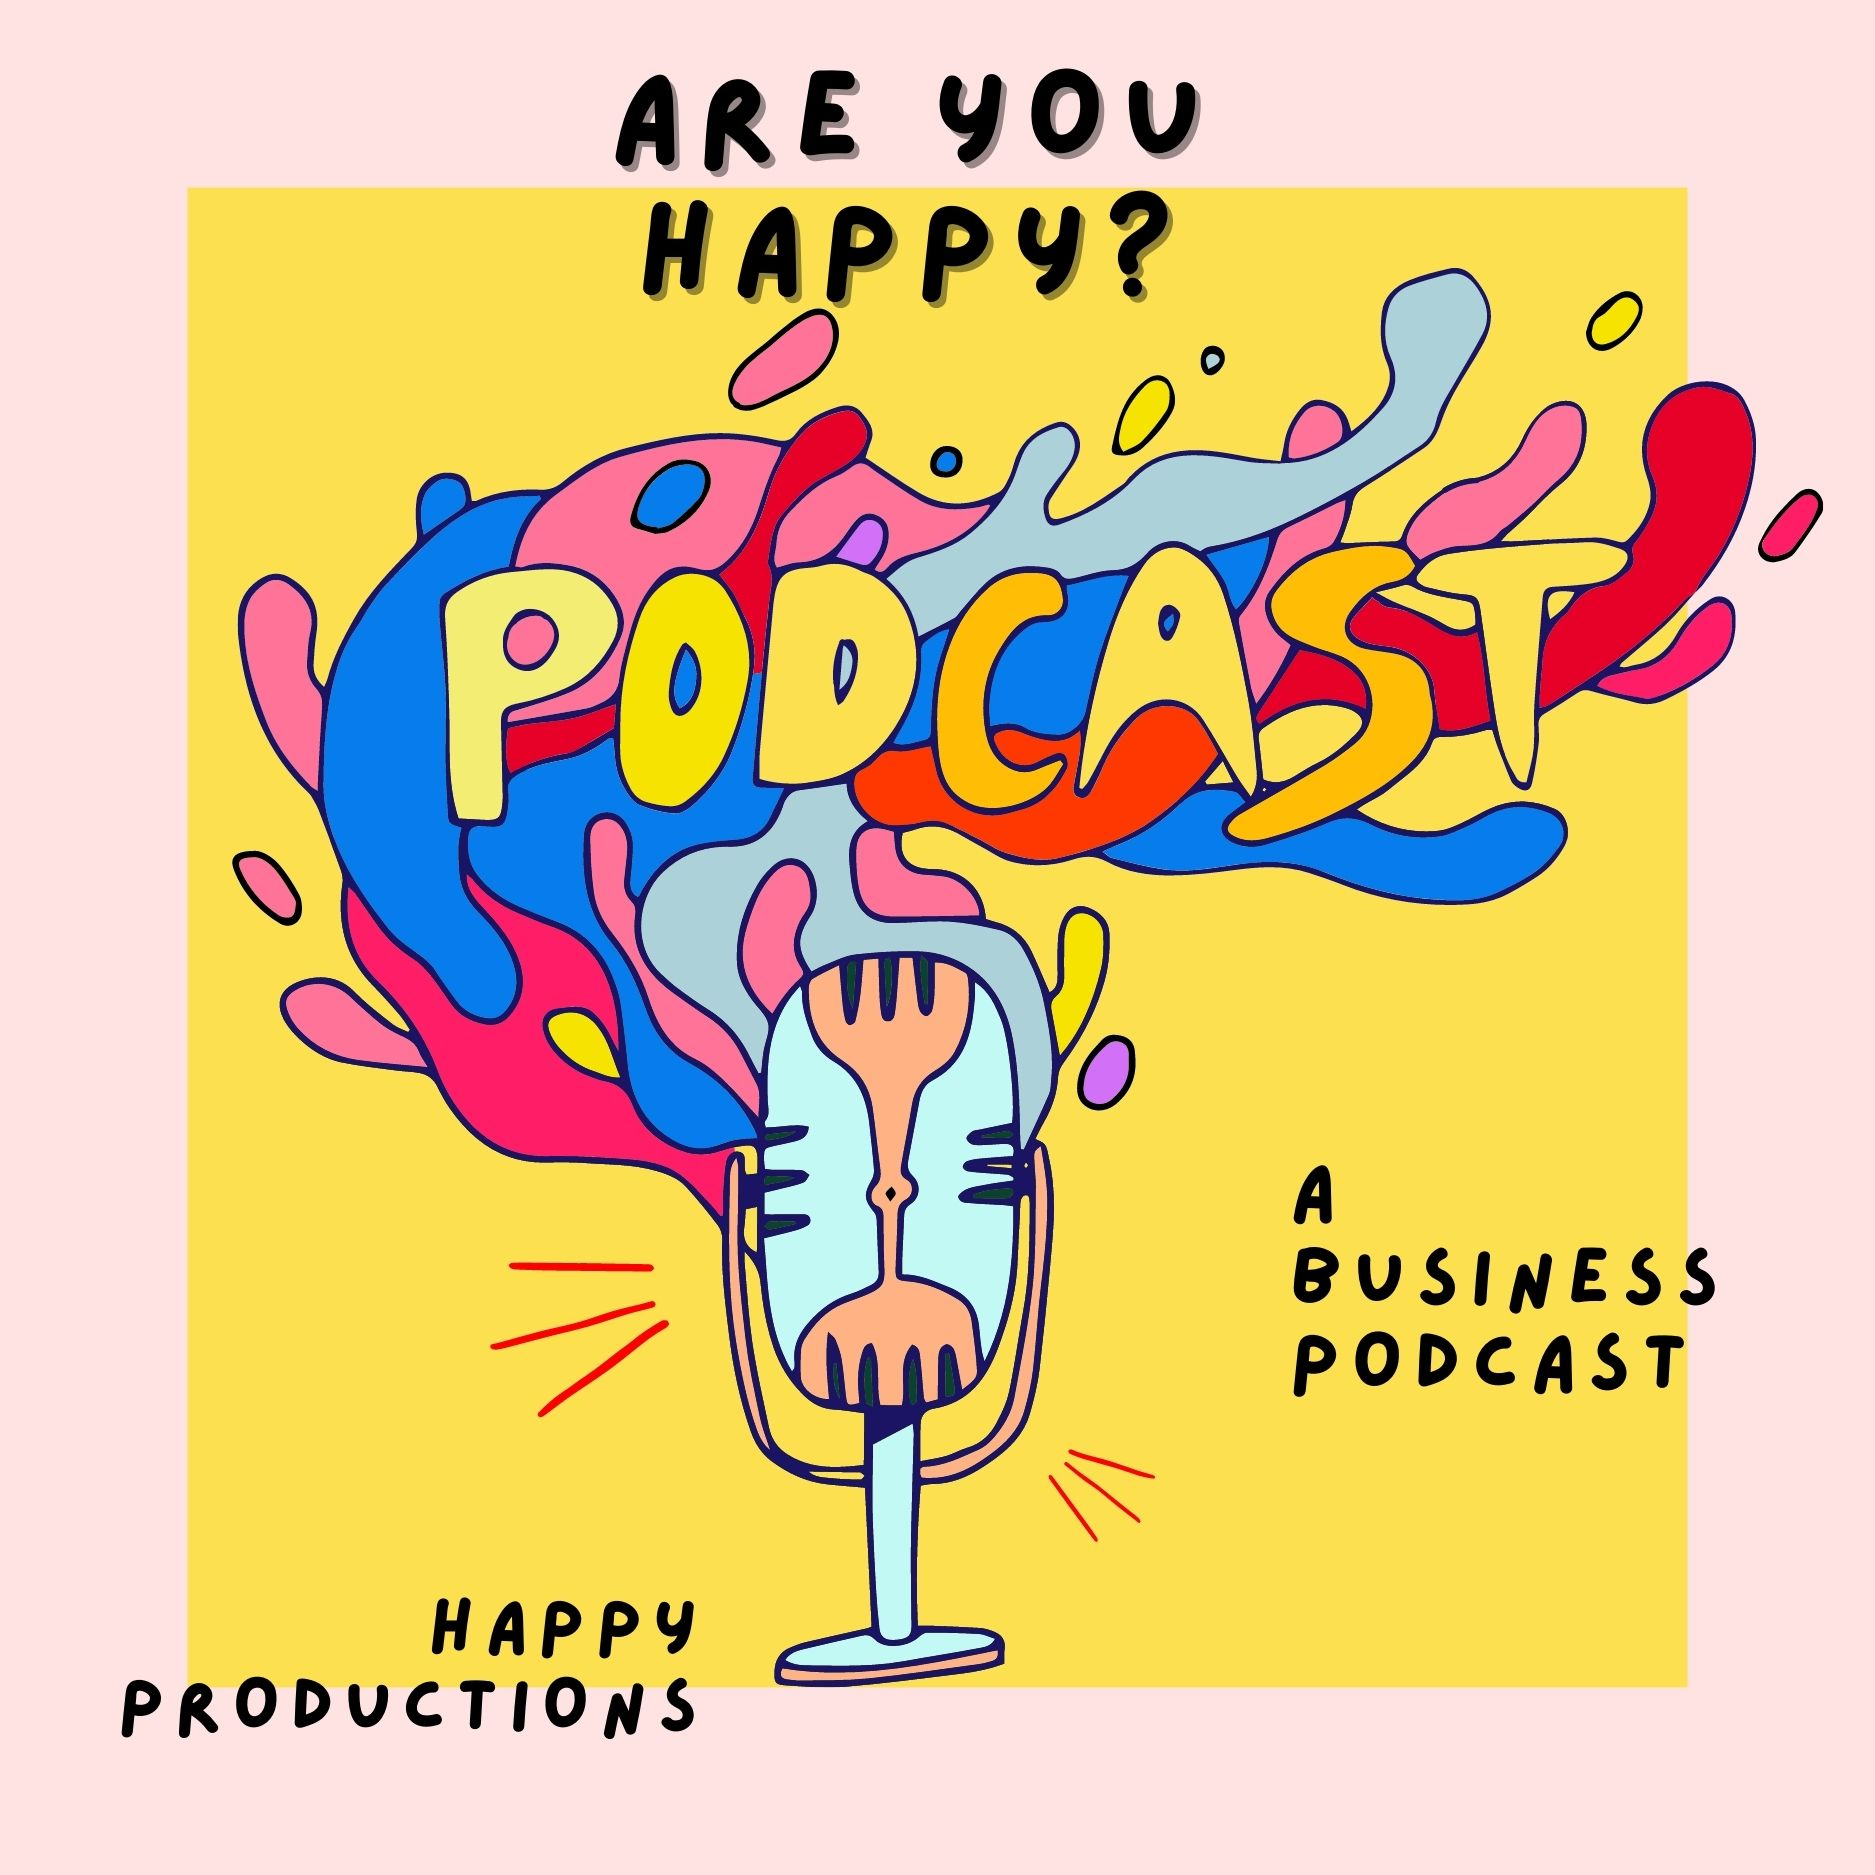 The Are You Happy Business Podcast